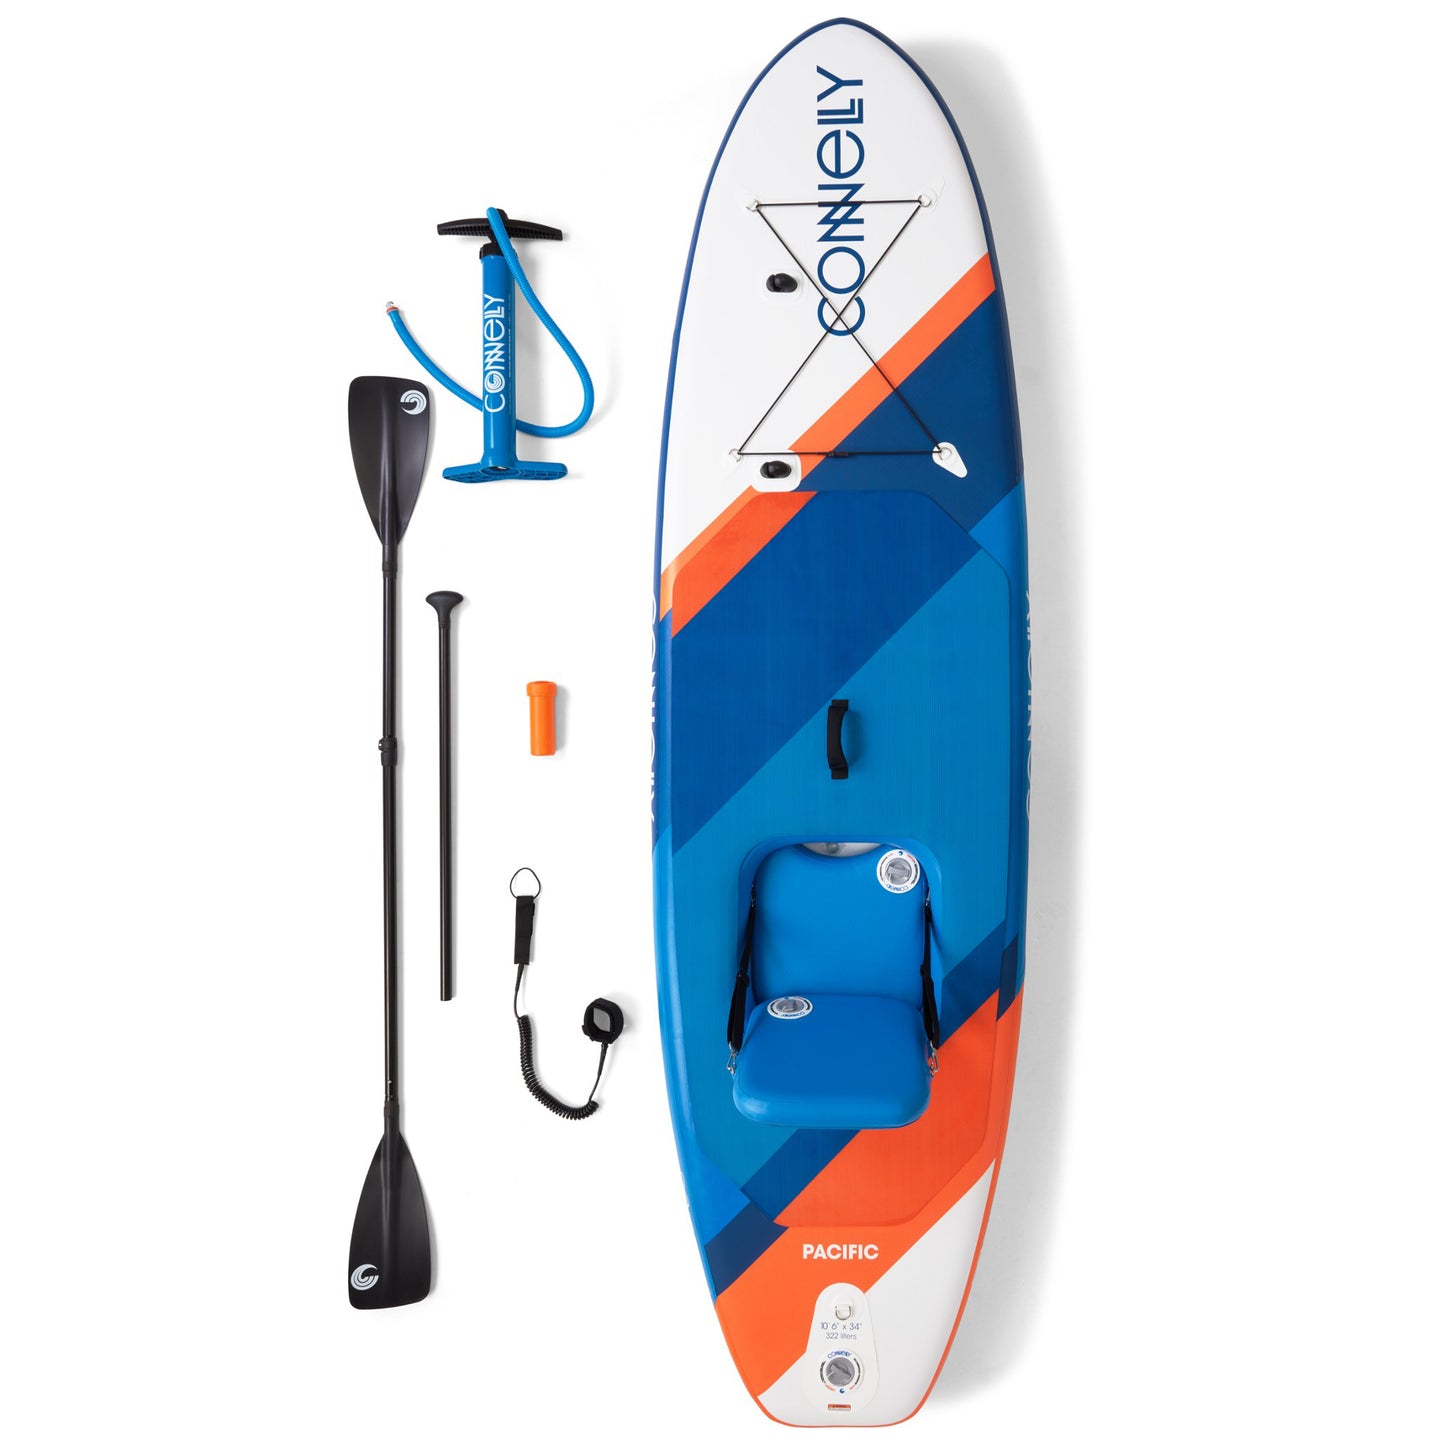 Pacific Inflatable Standup Paddleboard- 10'6"